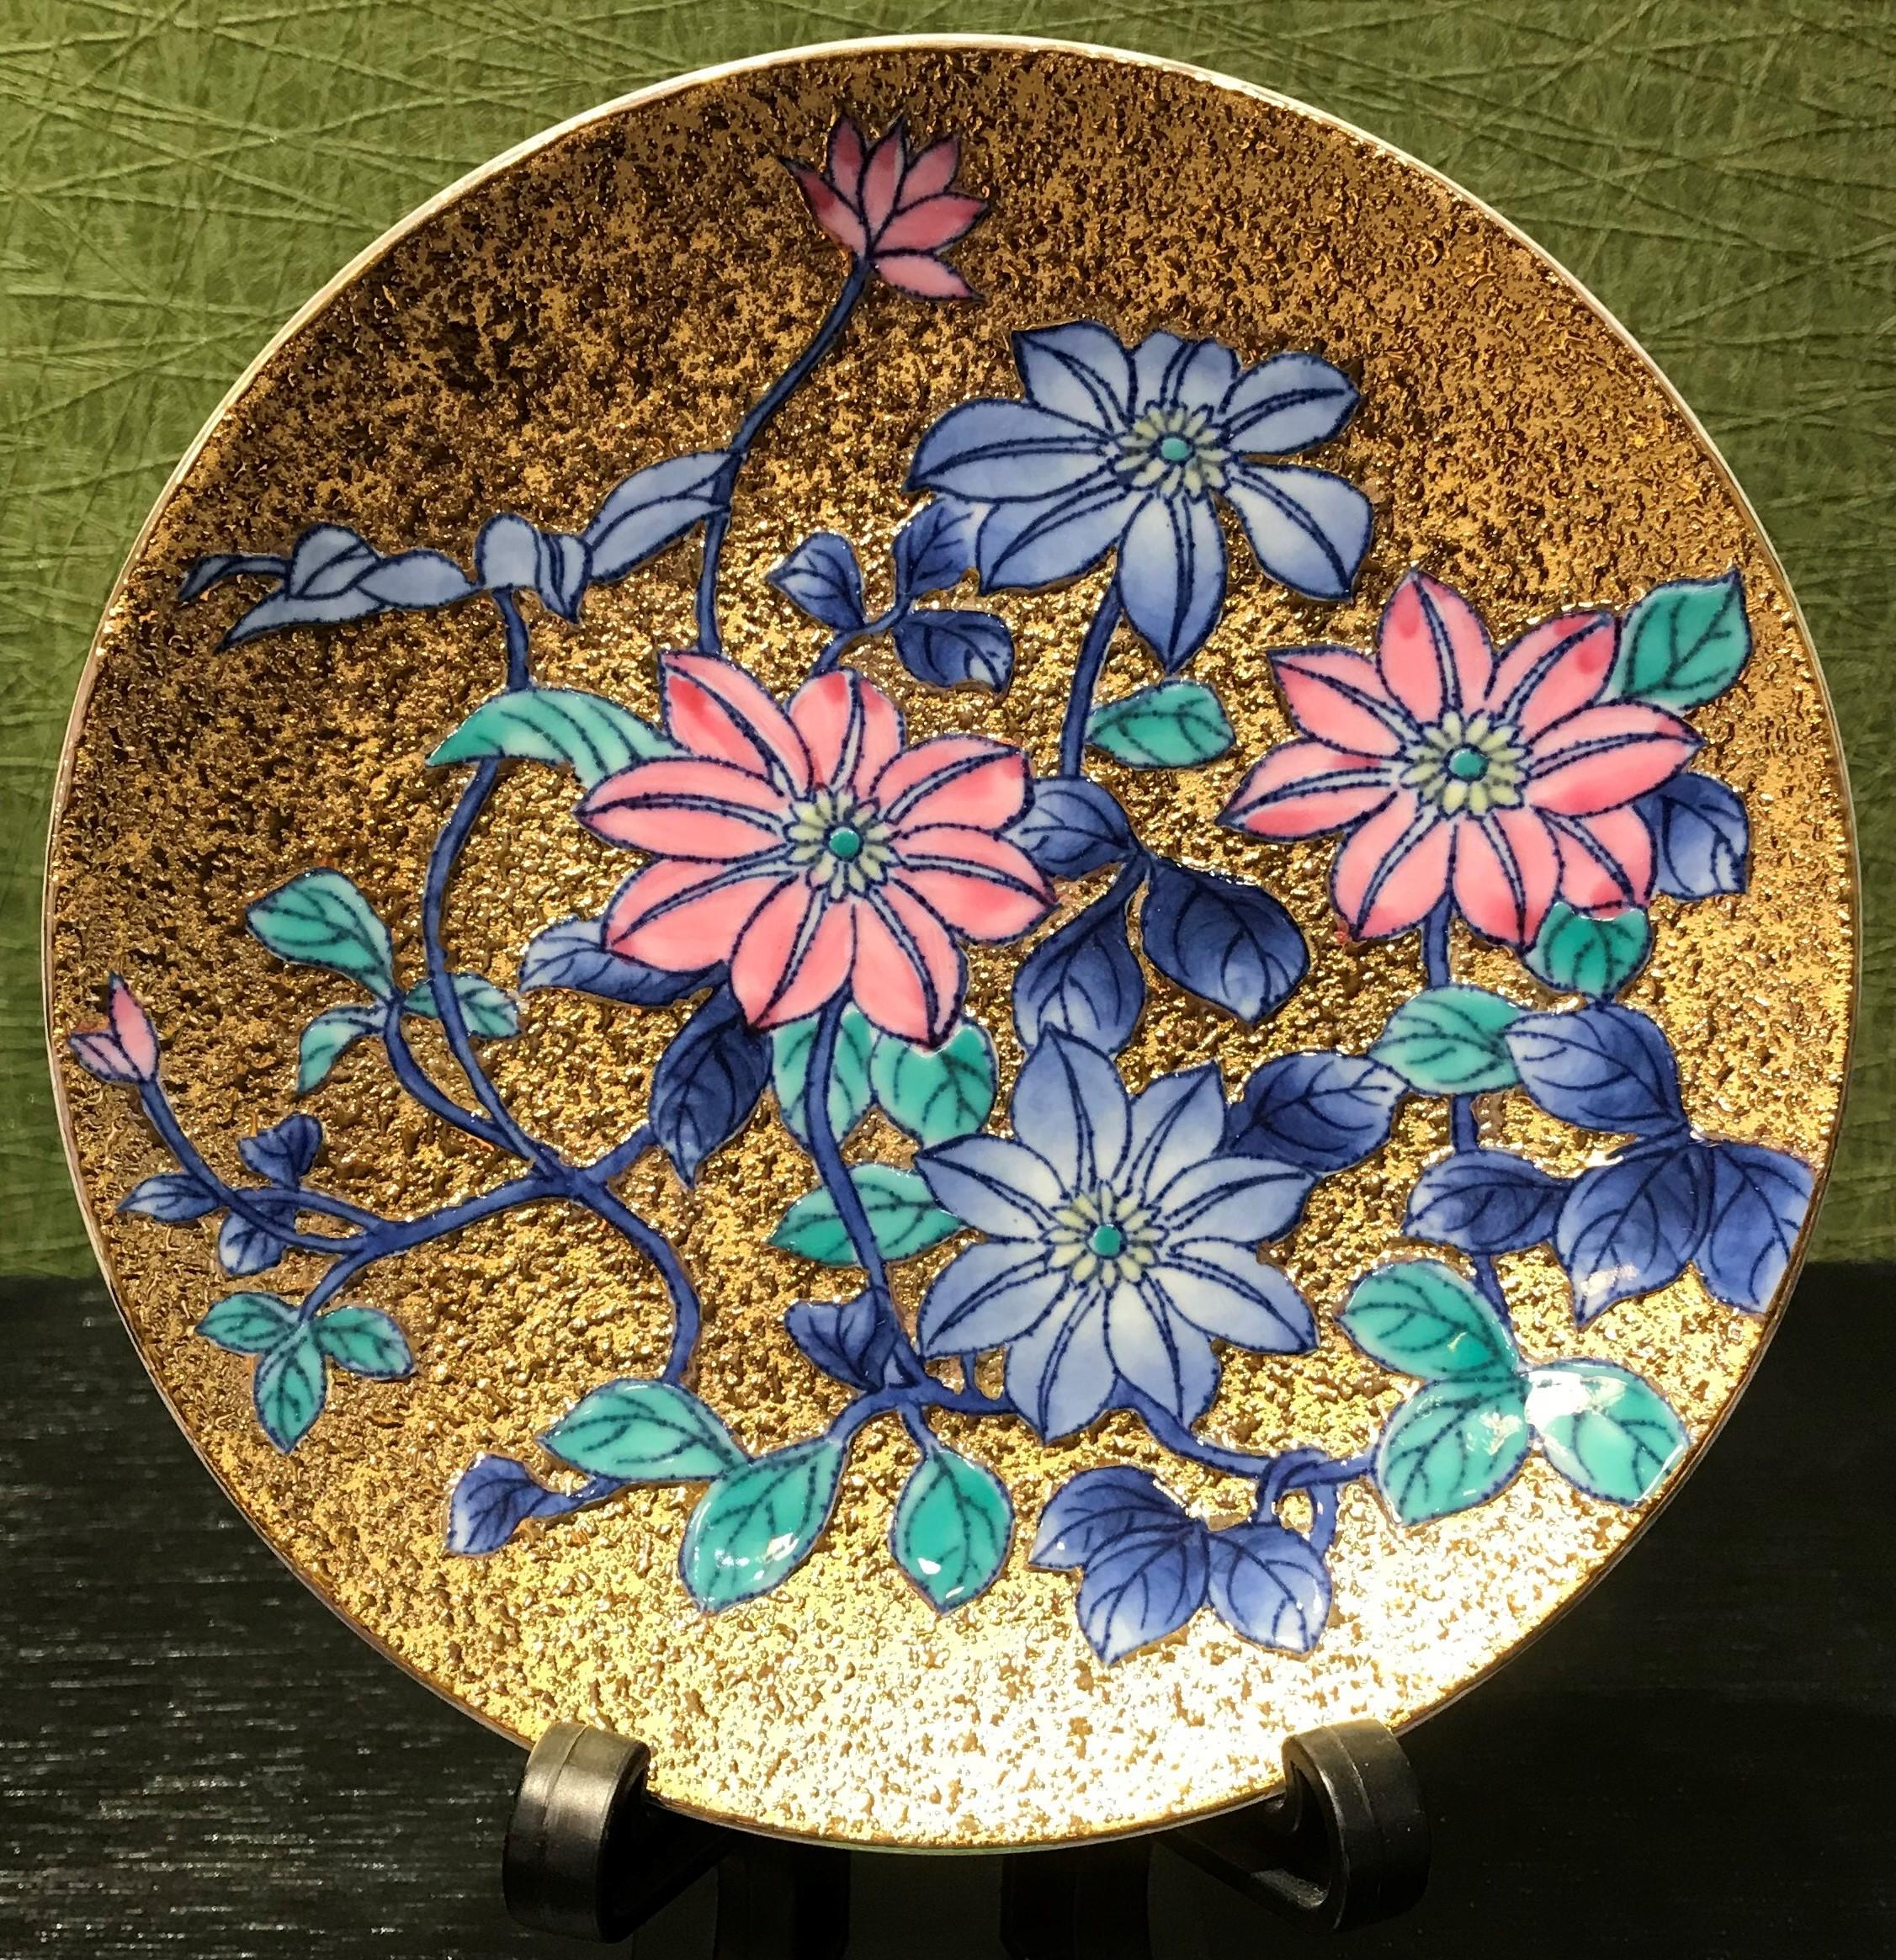 Exquisite contemporary gilded fine porcelain cup and saucer, intricately hand painted in vivid blue and pink on an attractive gilded body, featuring stunning clematis flowers in full bloom.
This cup and saucer is from a signature series by a highly